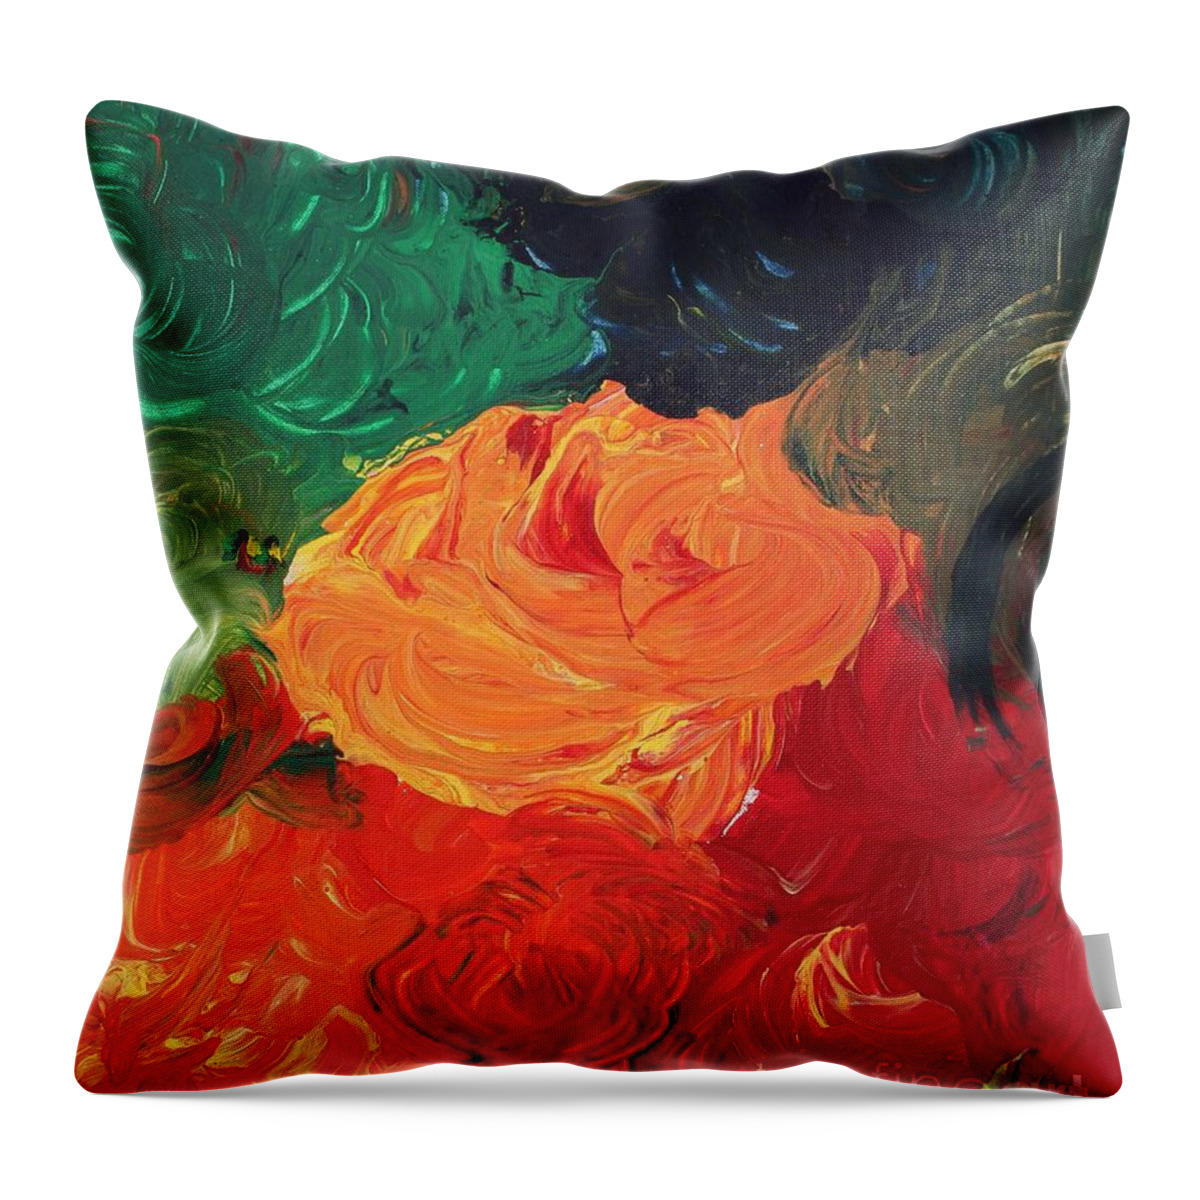 Veggies Throw Pillow featuring the painting Veggies by Sarahleah Hankes